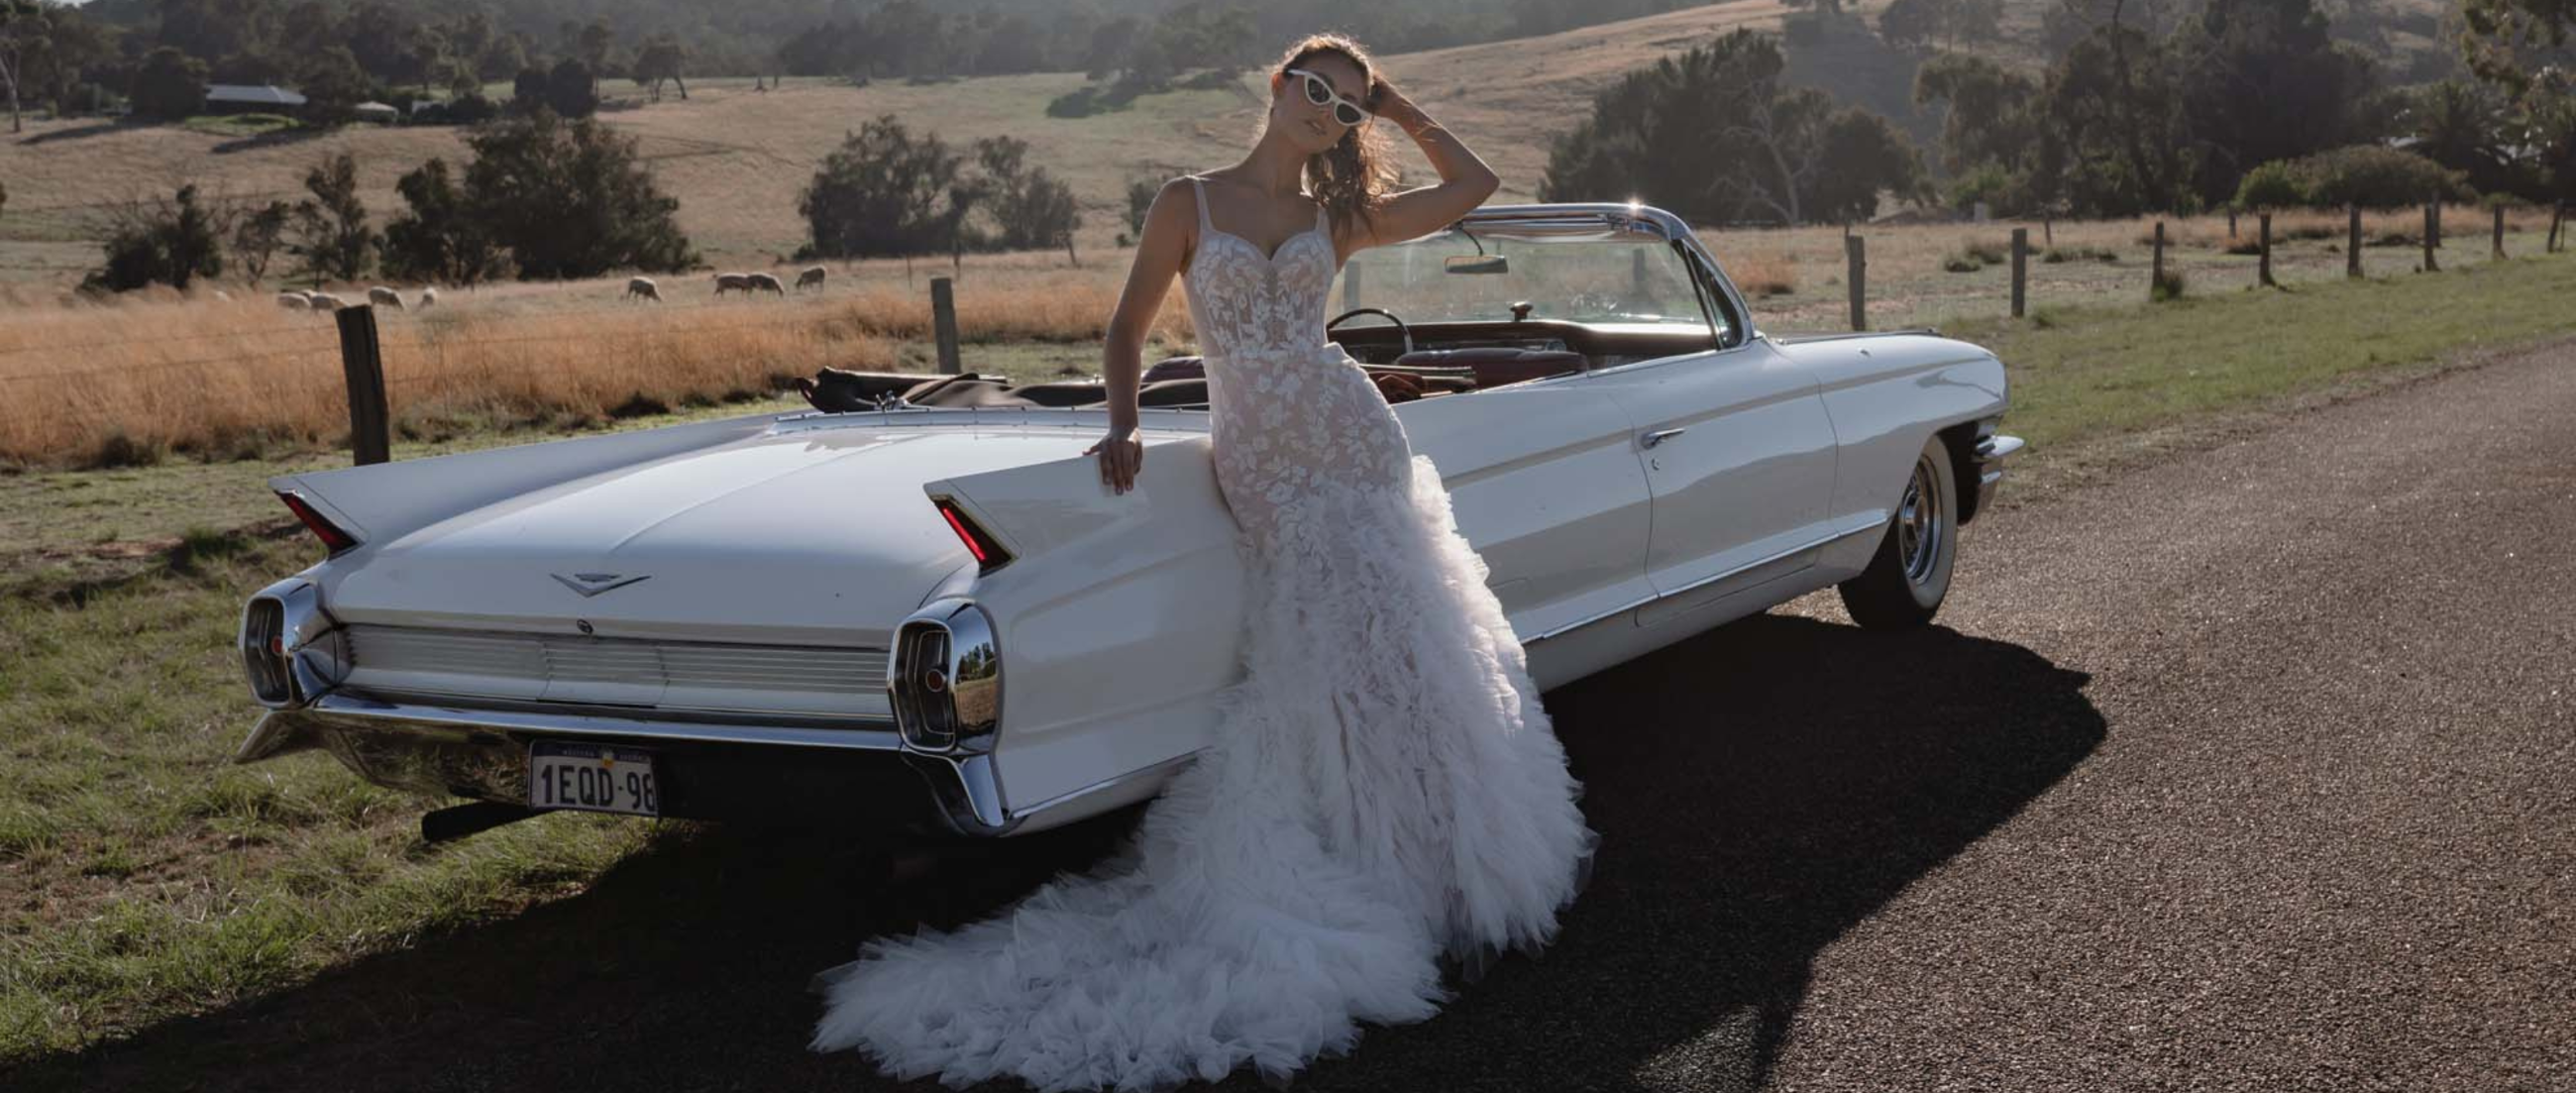 Your Guide to Posing in your Wedding Dress Image